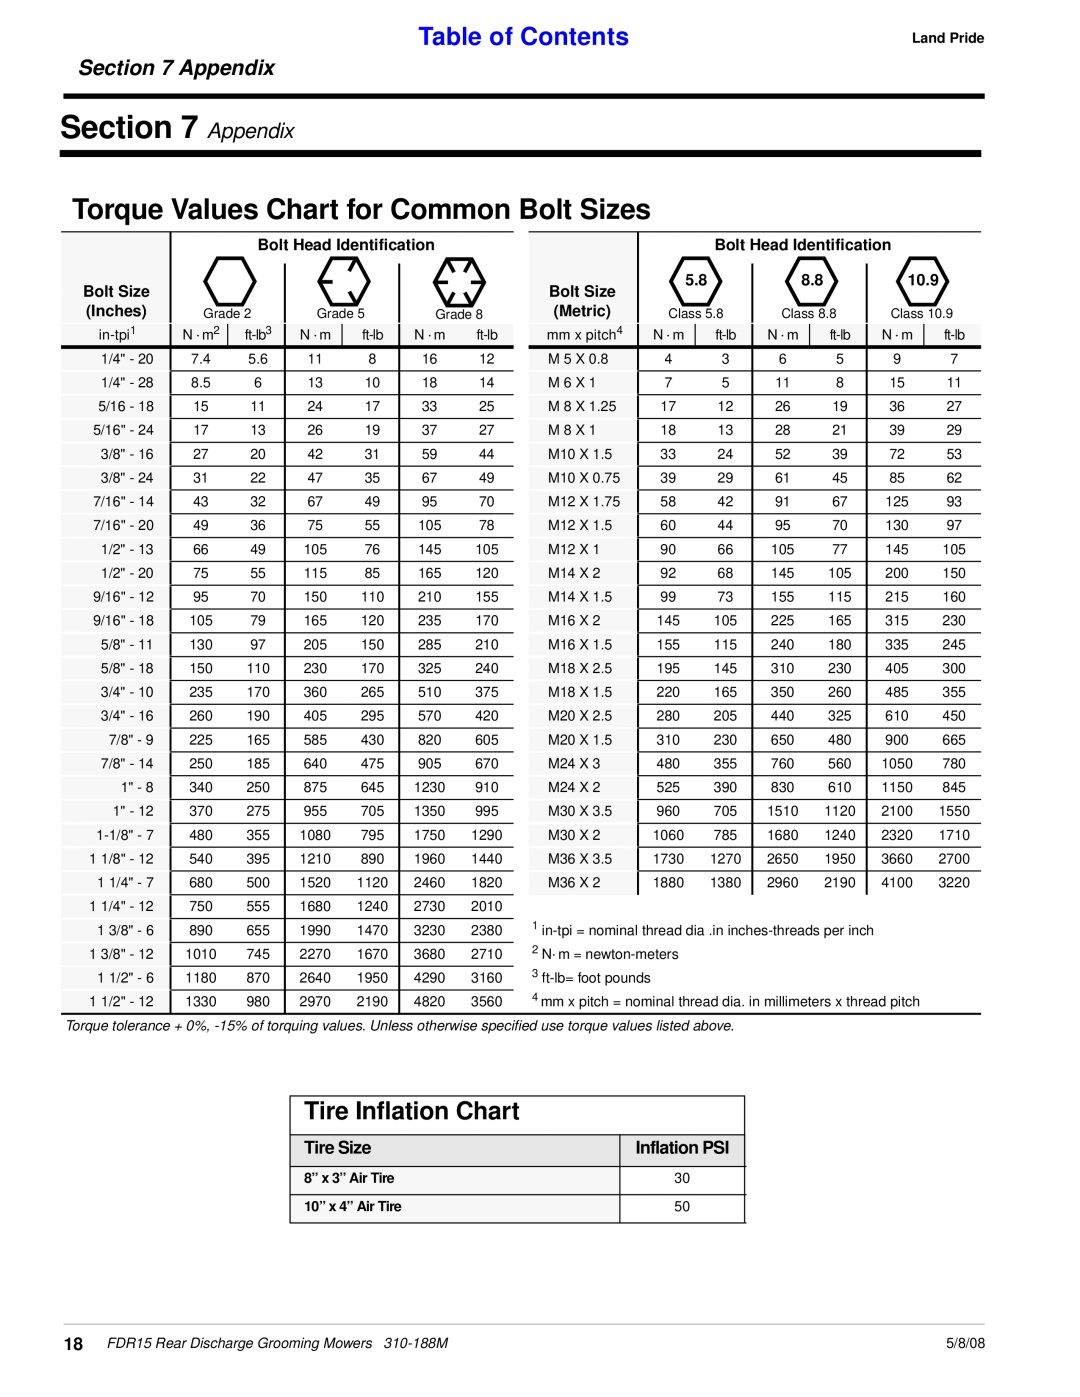 Land Pride FDR15 manual Appendix, Tire Inflation Chart, Tire Size, Inflation PSI, Torque Values Chart for Common Bolt Sizes 